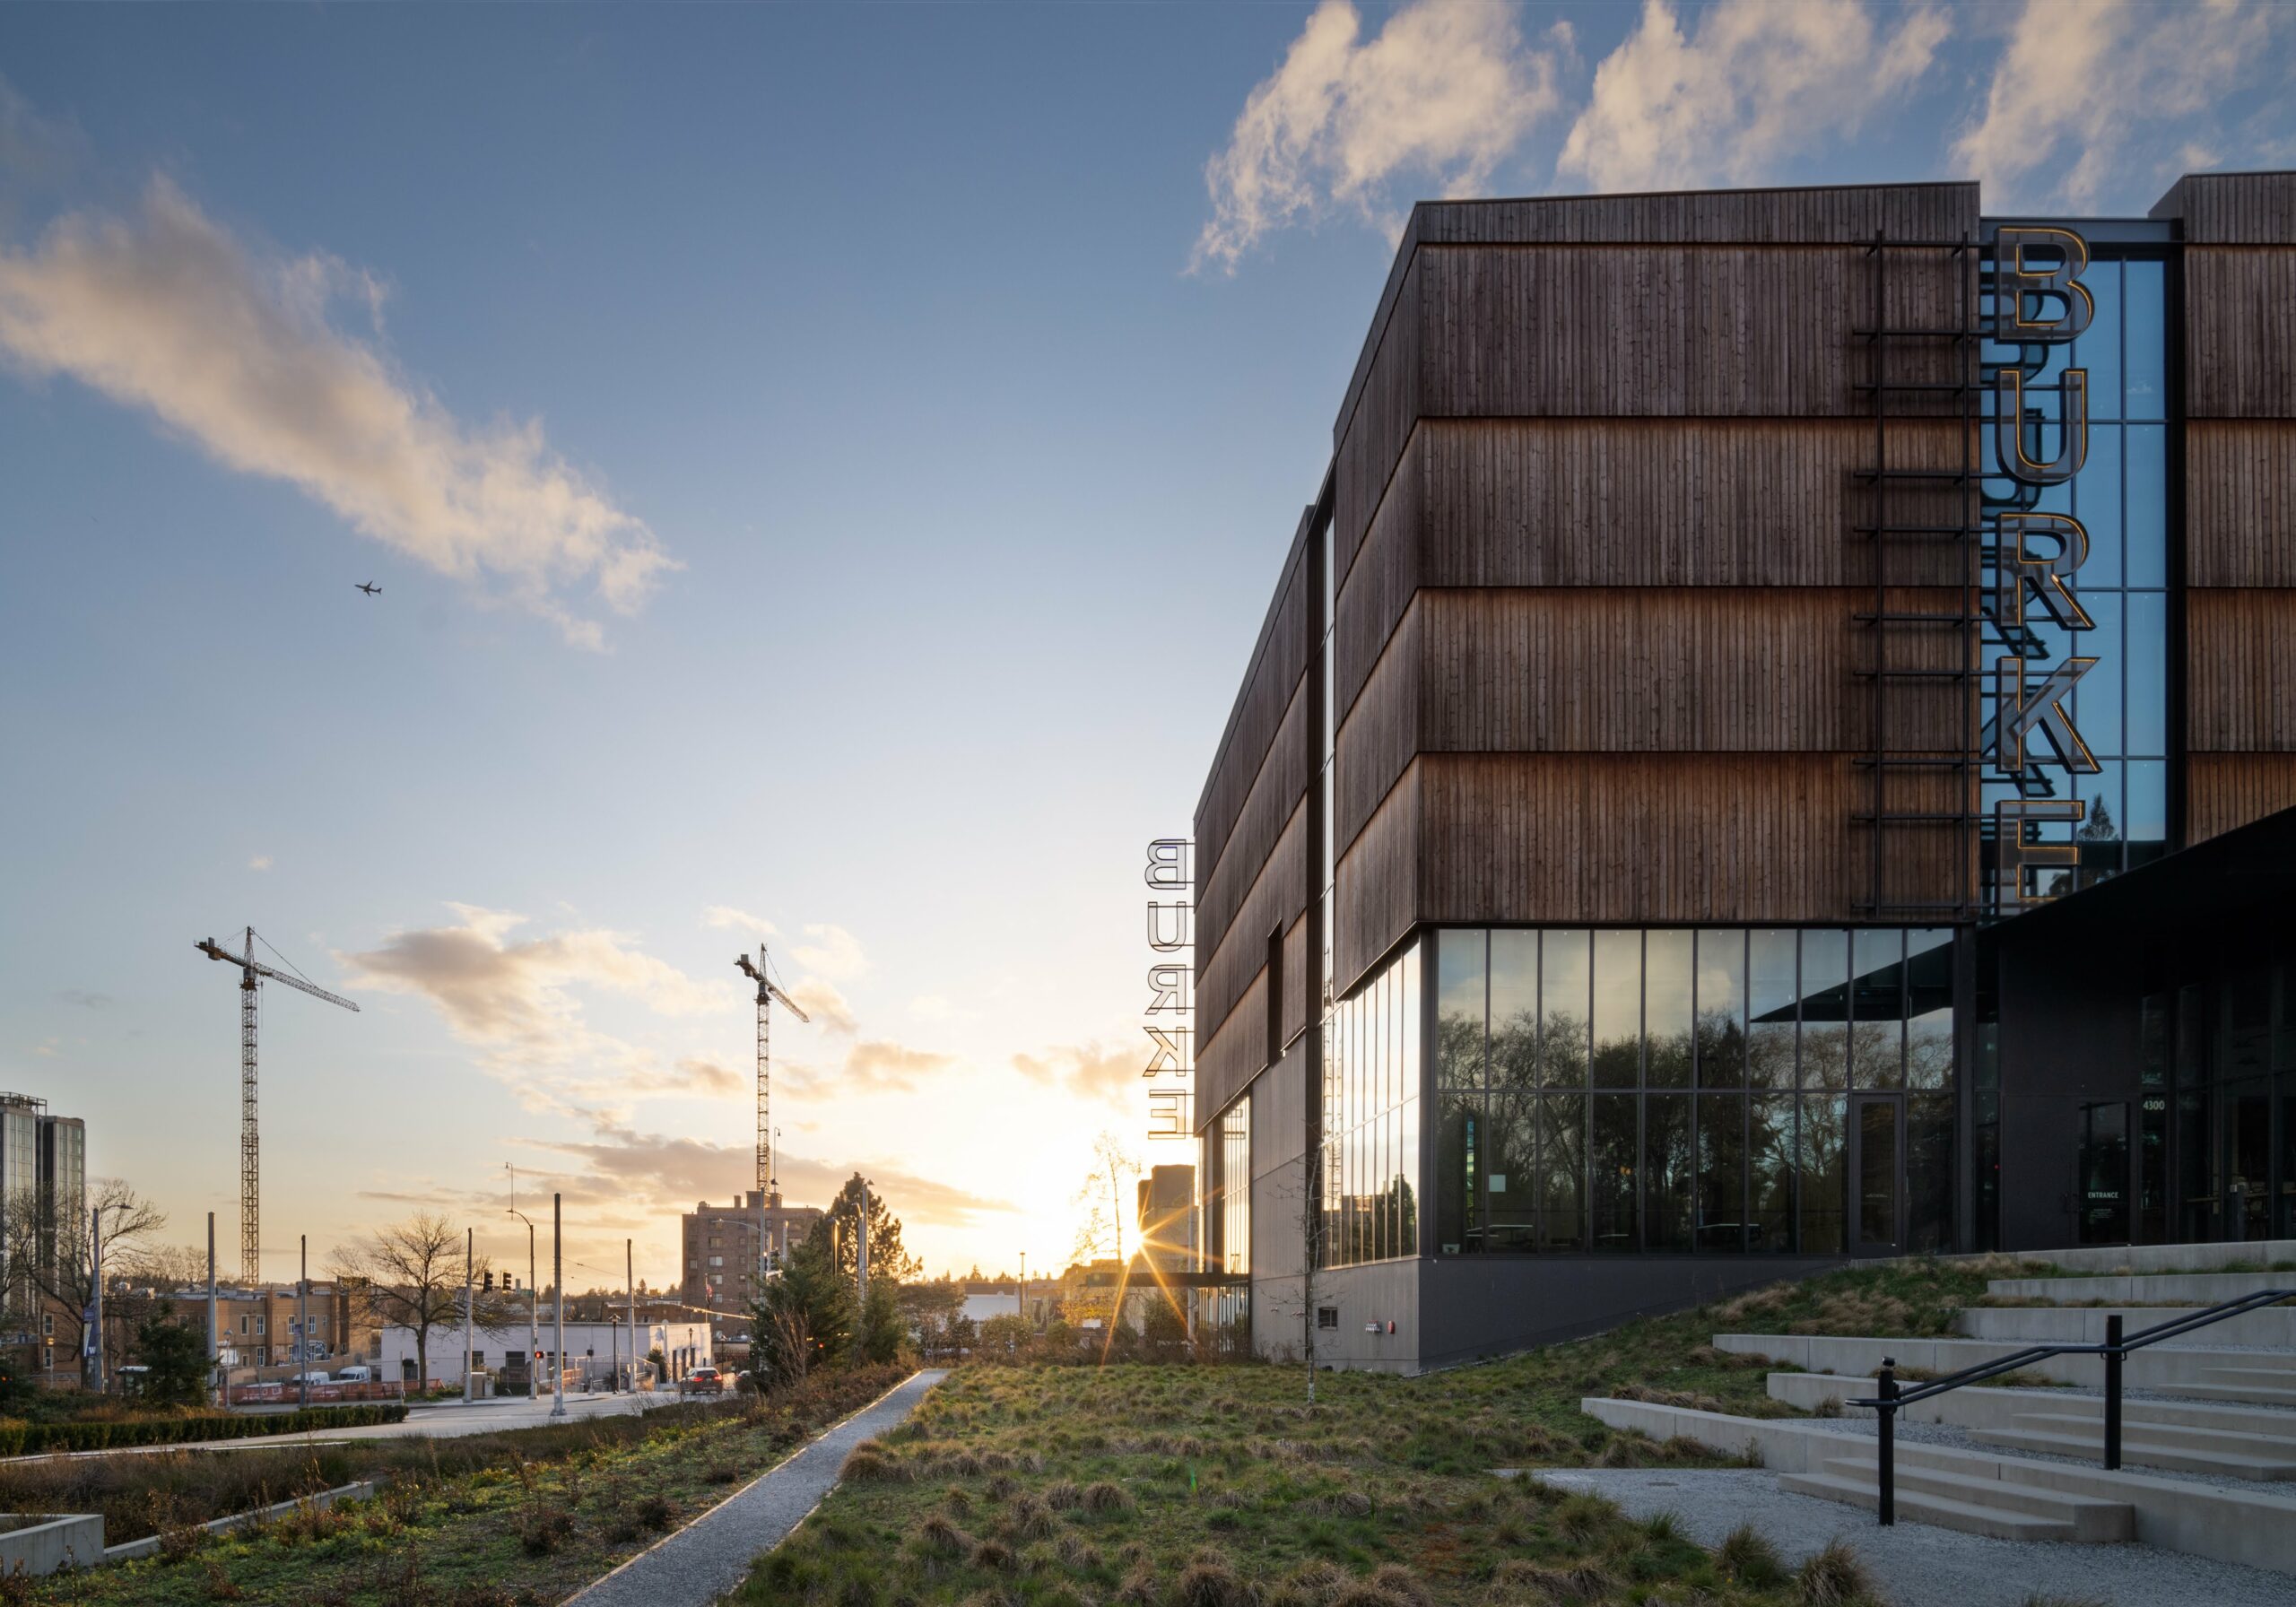 Exterior view of the burke natural history museum during a sunrise featuring kebony modified wood click in cladding